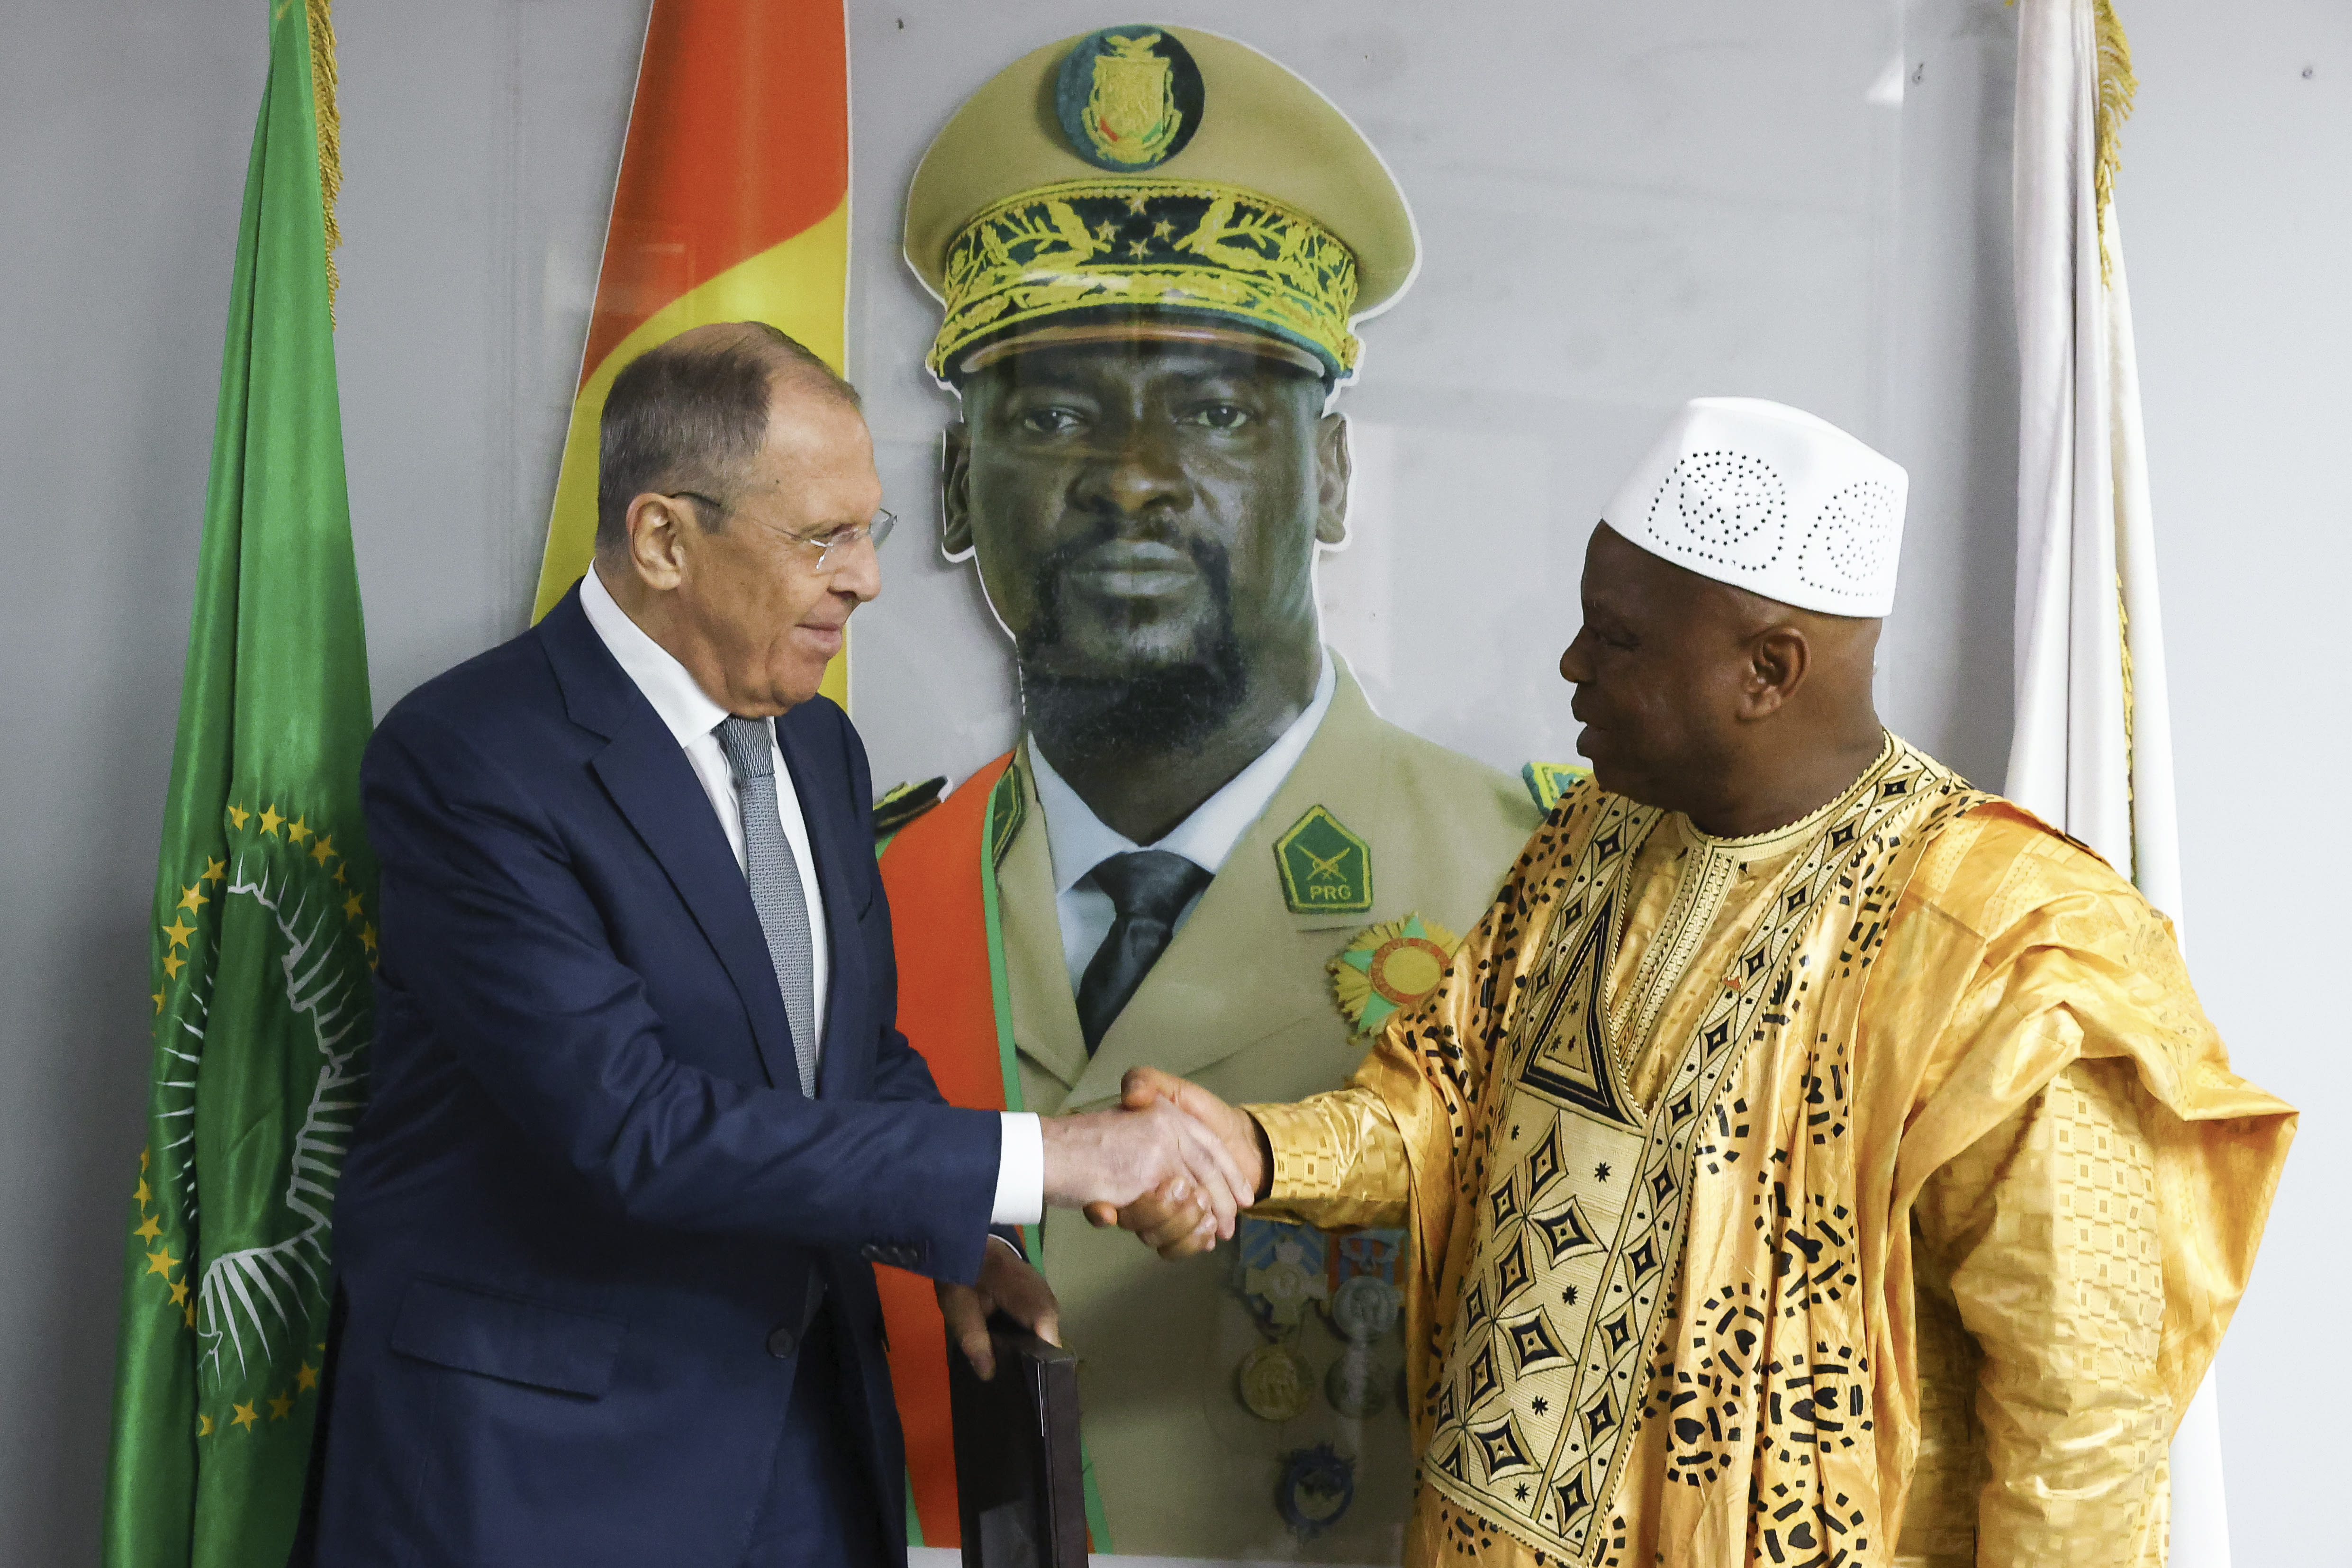 Russia’s foreign minister again visits Africa